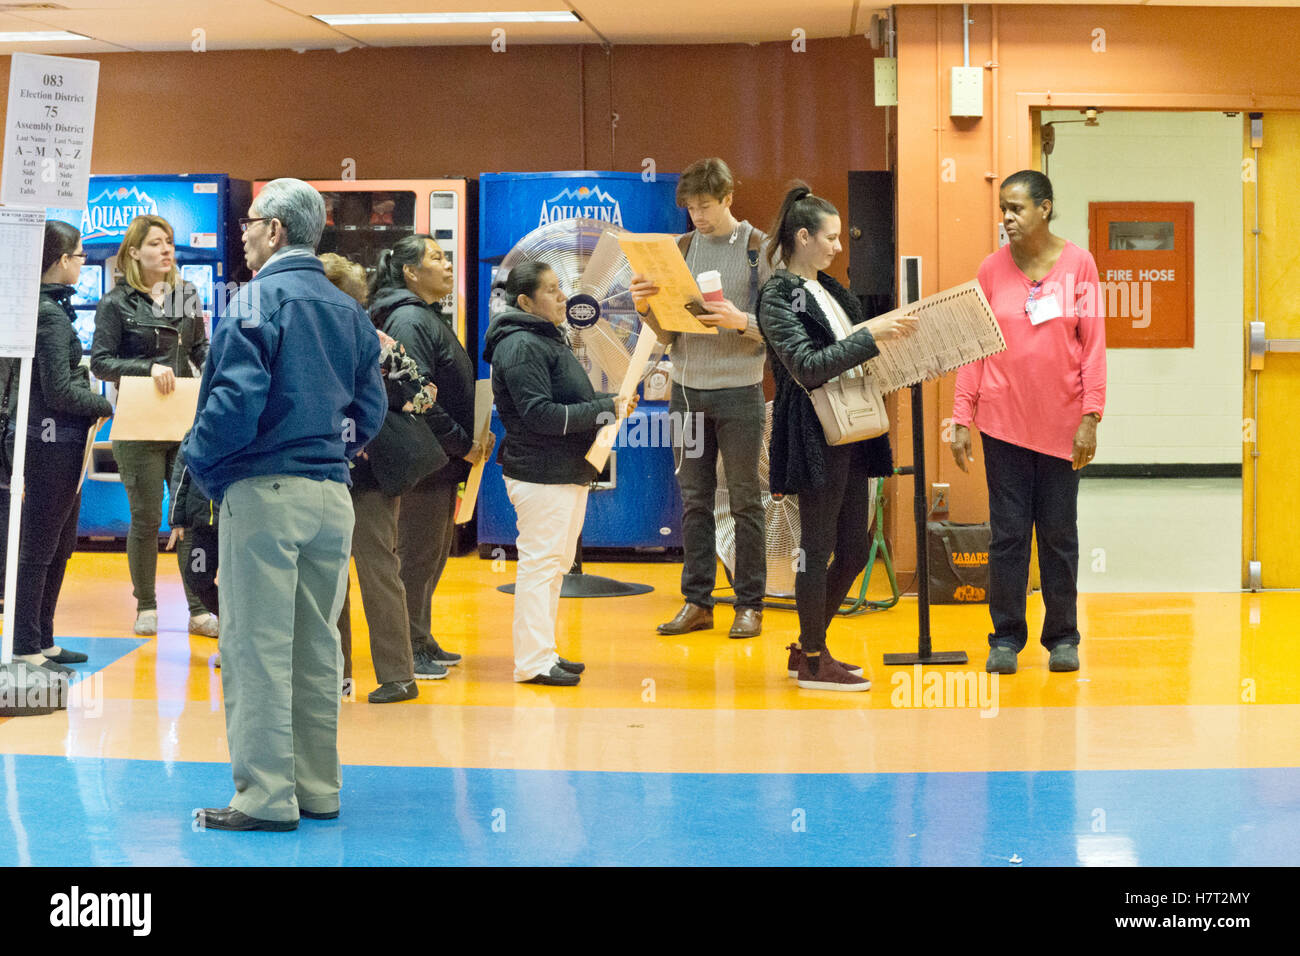 New York, USA. 8th November, 2016. group of typical multi ethnic New Yorkers in line to scan their votes at Park West Vocational High School cheerful cafeteria in Hells Kitchen neighborhood. The lines for registration & scanners were longer than at kiosks for filling out ballots.Park West High School gathers teens from many boroughs to train as cooks. It doesn't look like the kids are offered too many sweet soft drinks by the look of the vending machines. Credit:  Dorothy Alexander/Alamy Live News Stock Photo